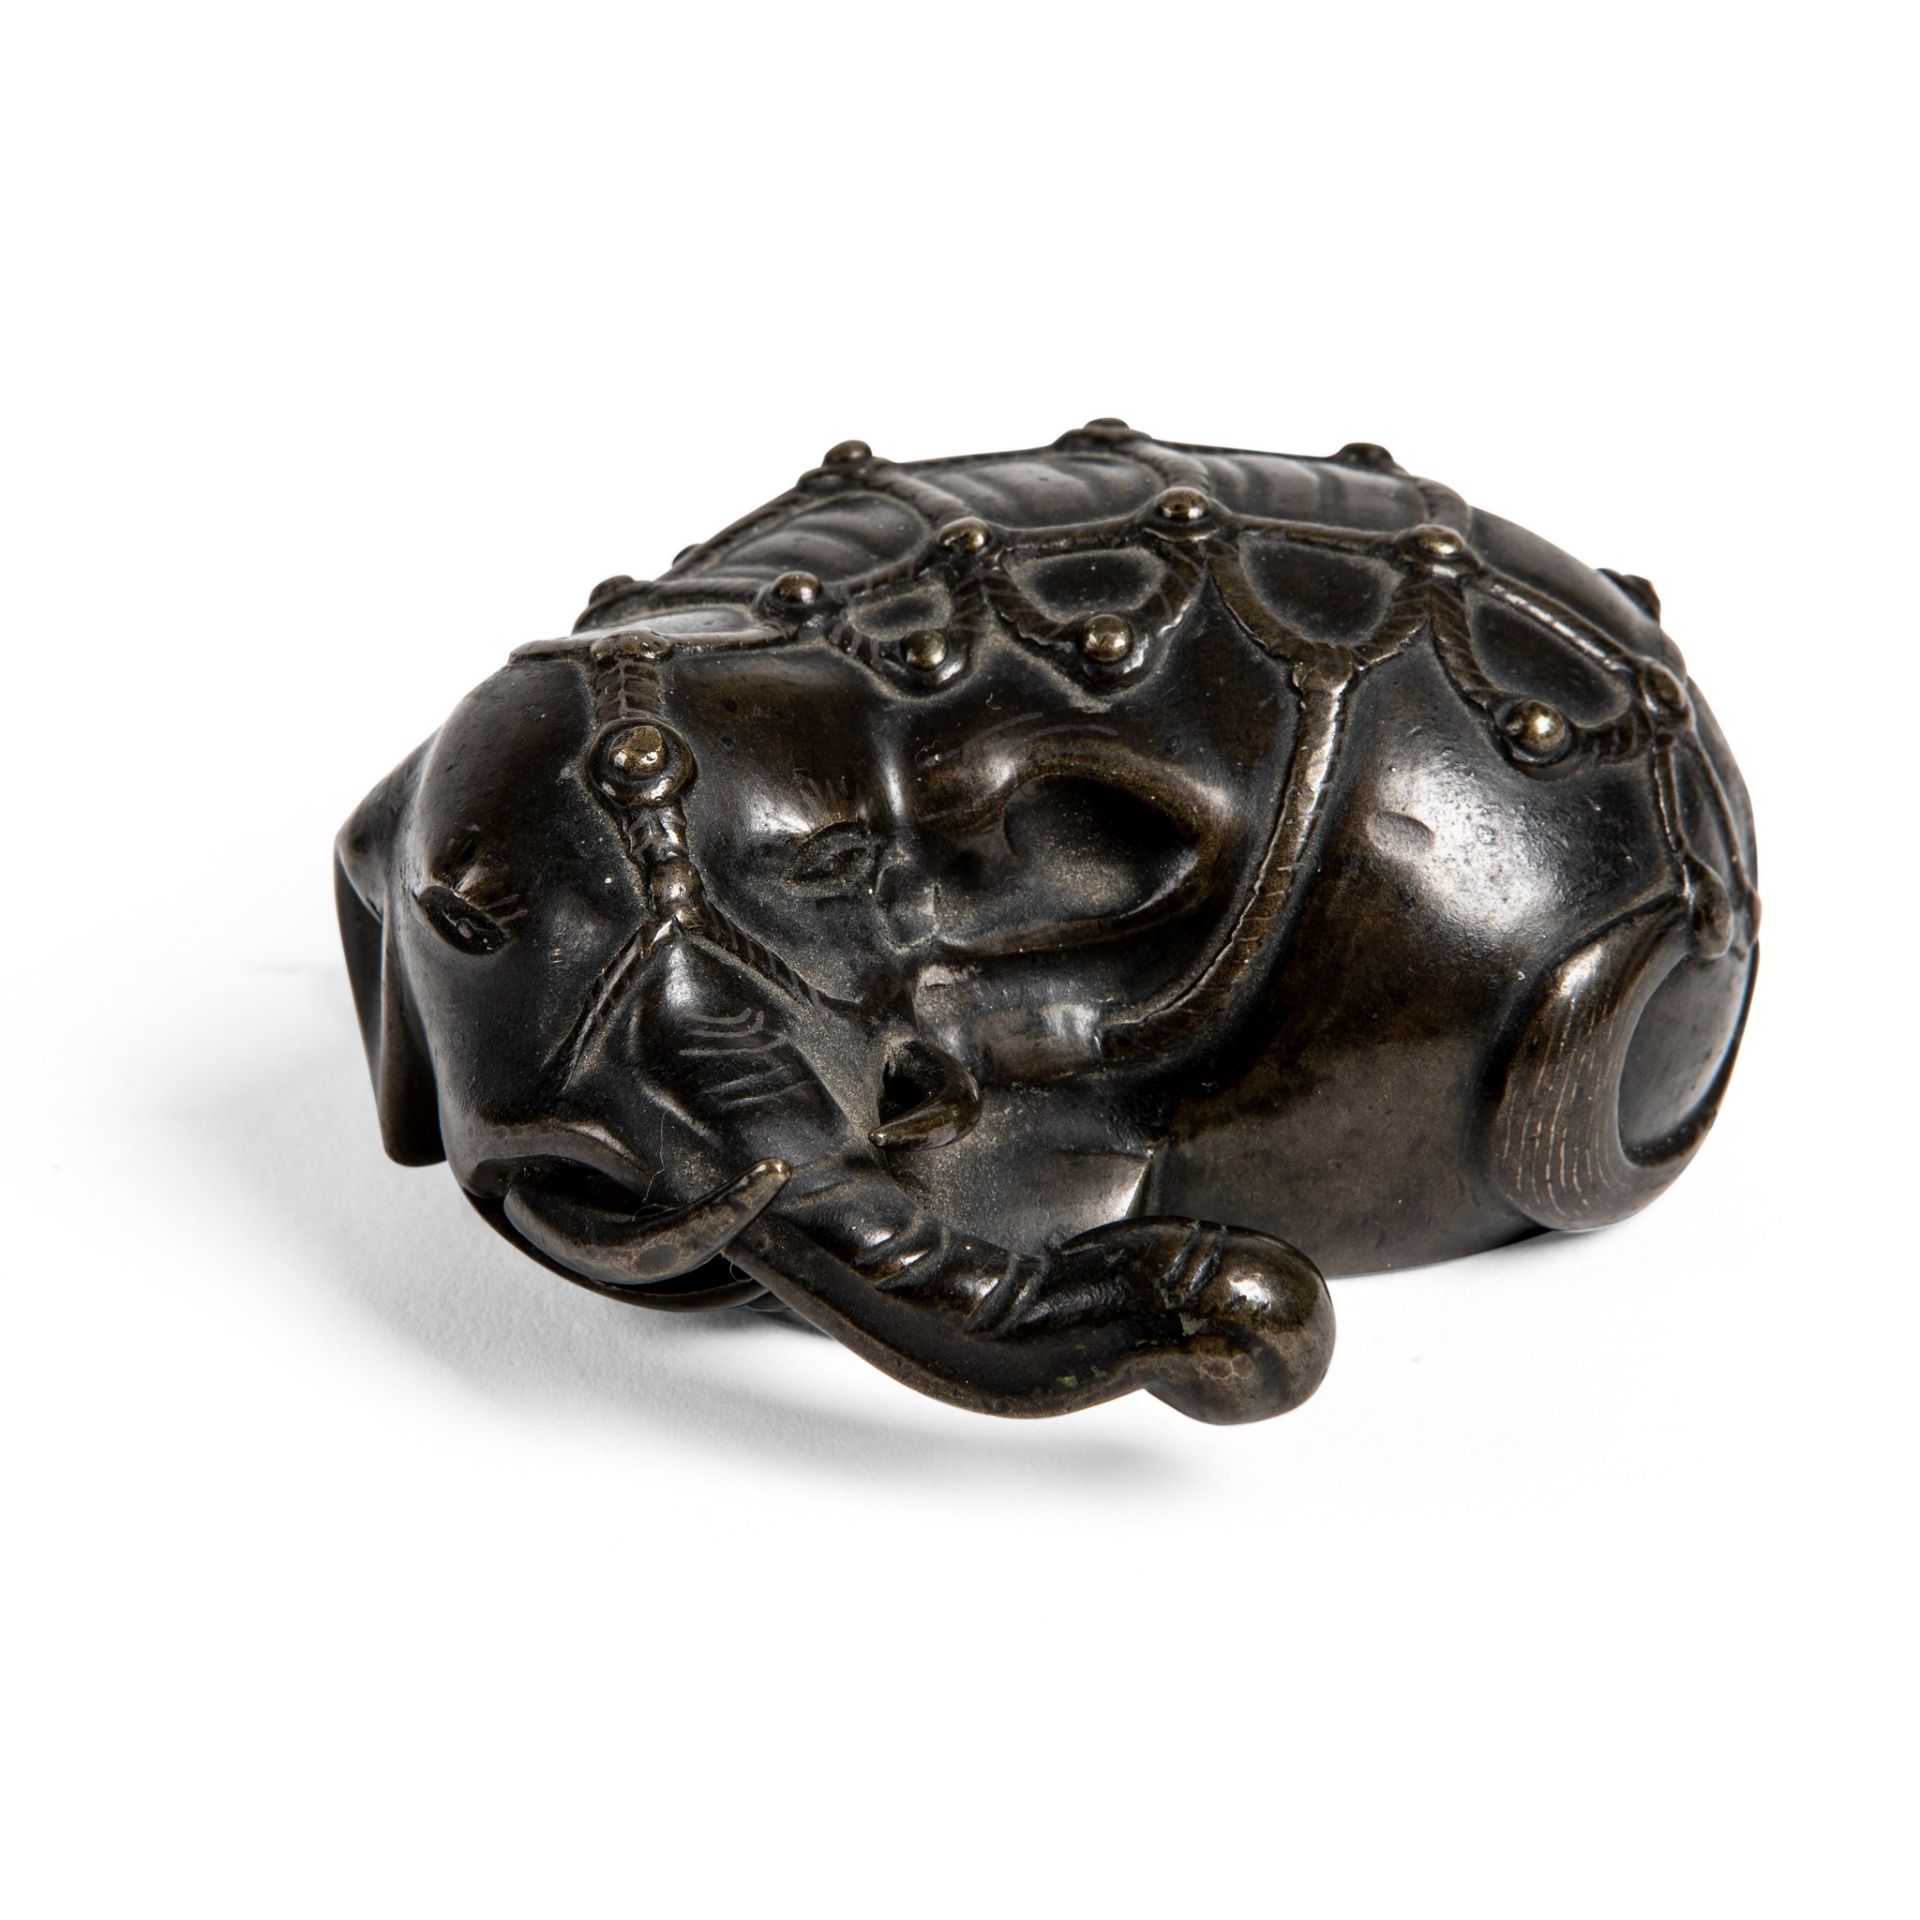 BRONZE PAPERWEIGHT OF AN ELEPHANT QING DYNASTY, 19TH CENTURY